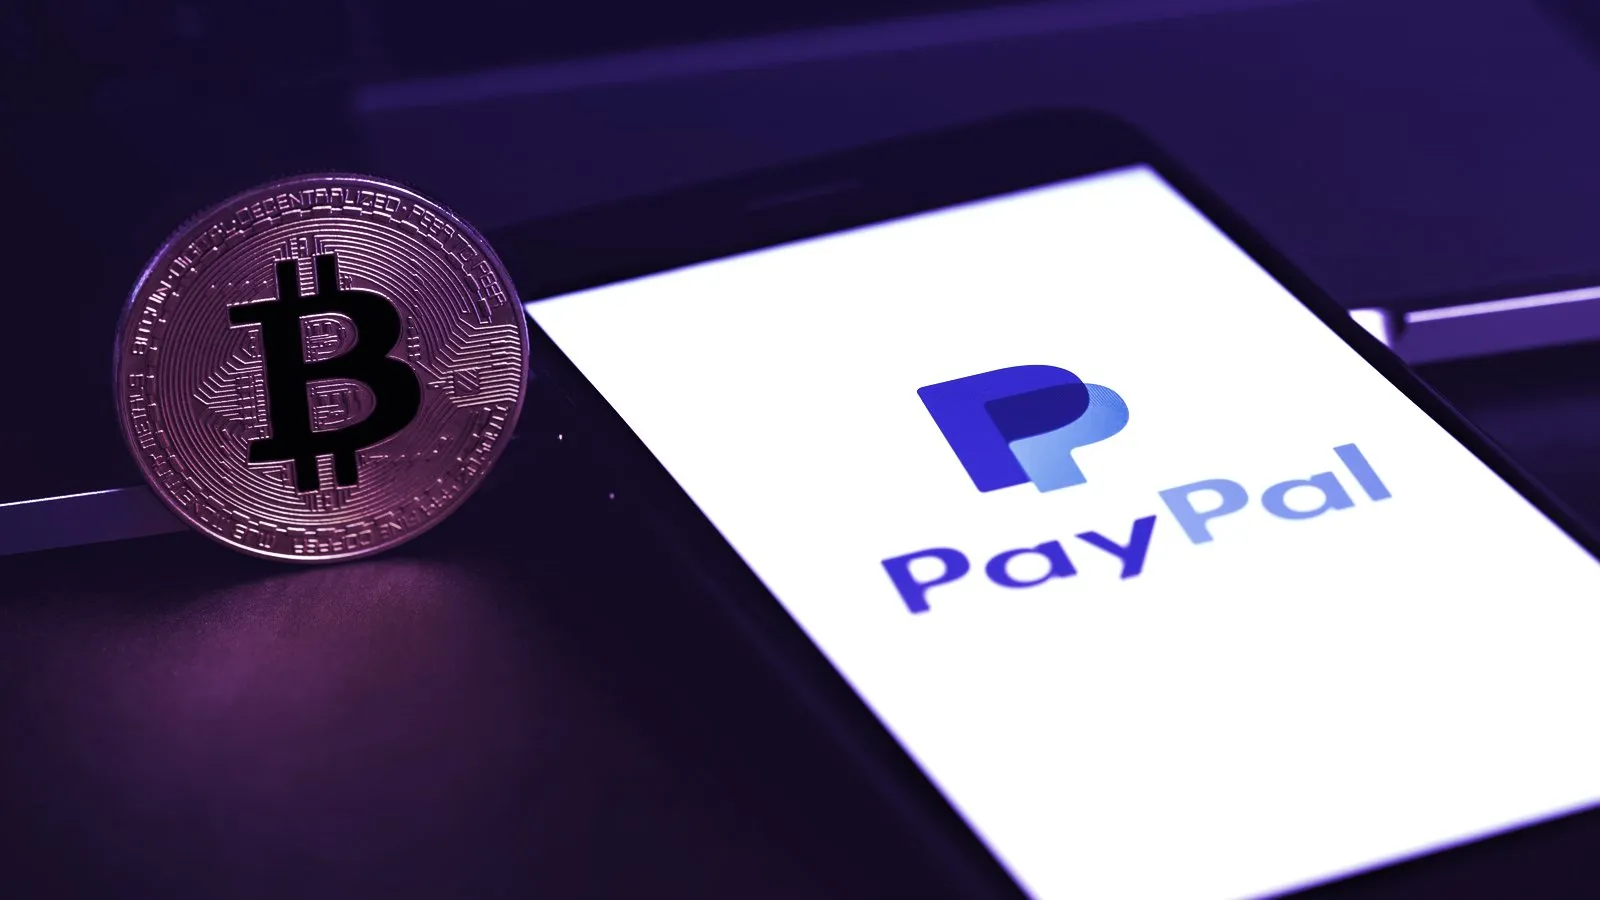 PayPal and Bitcoin. Image: Shutterstock